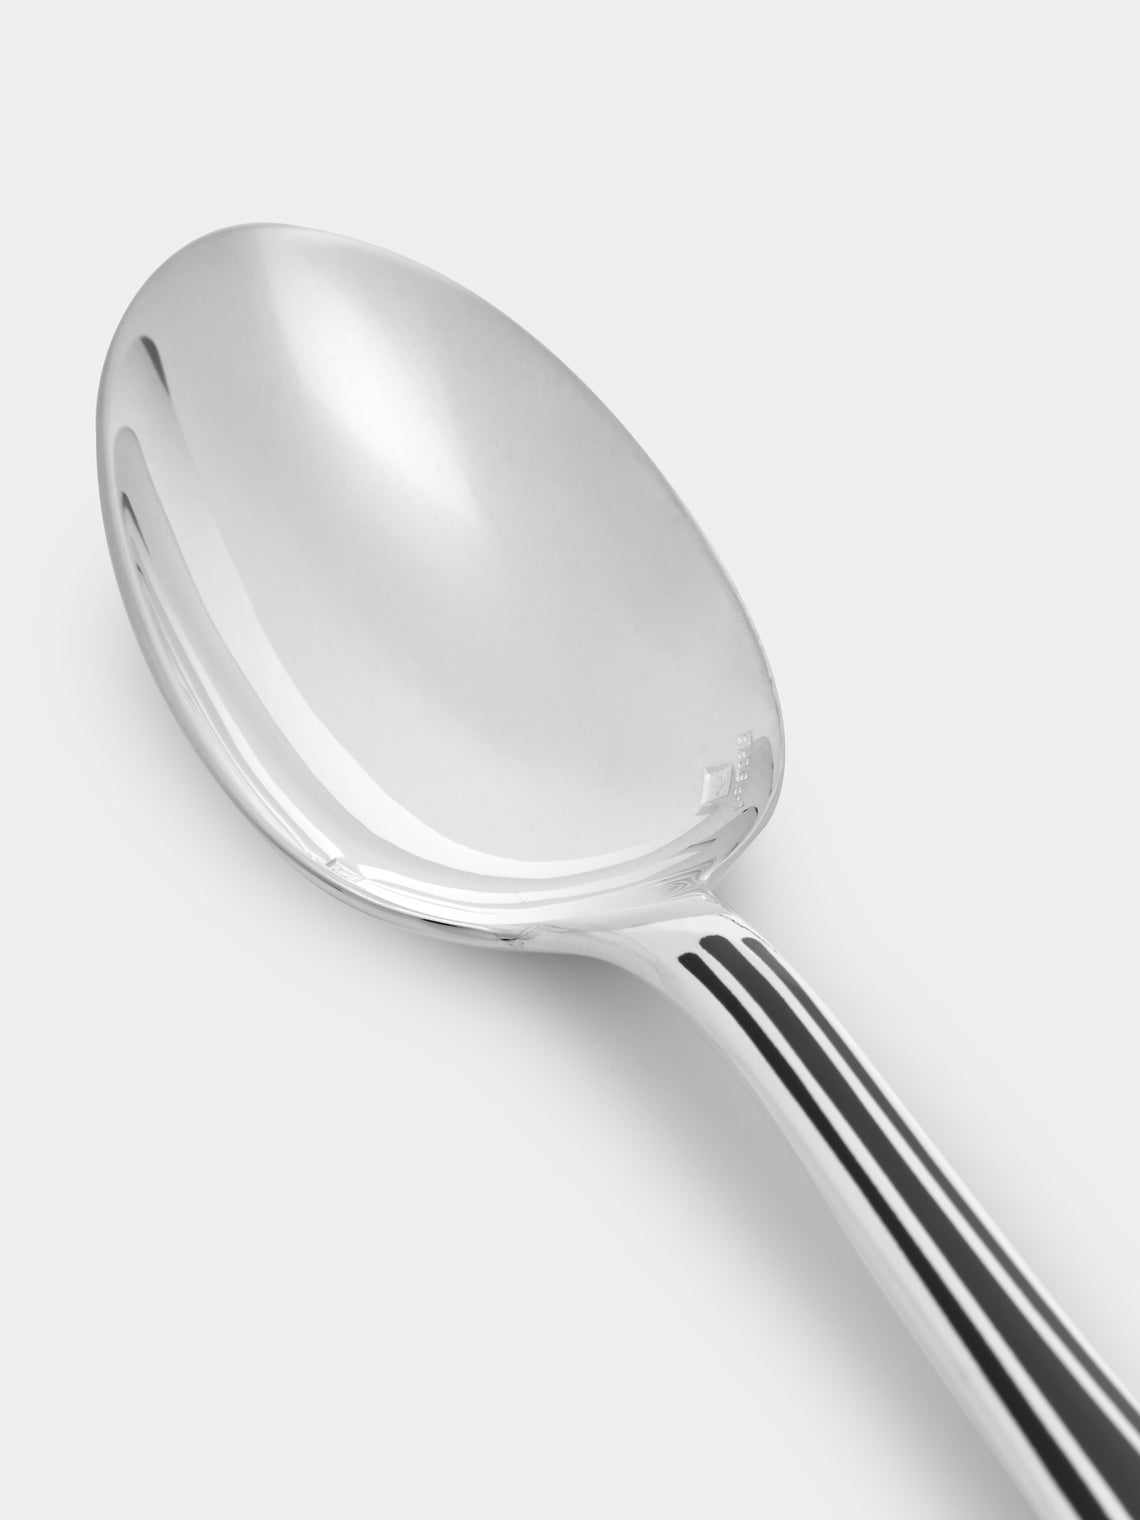 Christofle - Talisman Silver-Plated Dessert Spoon - Silver - ABASK